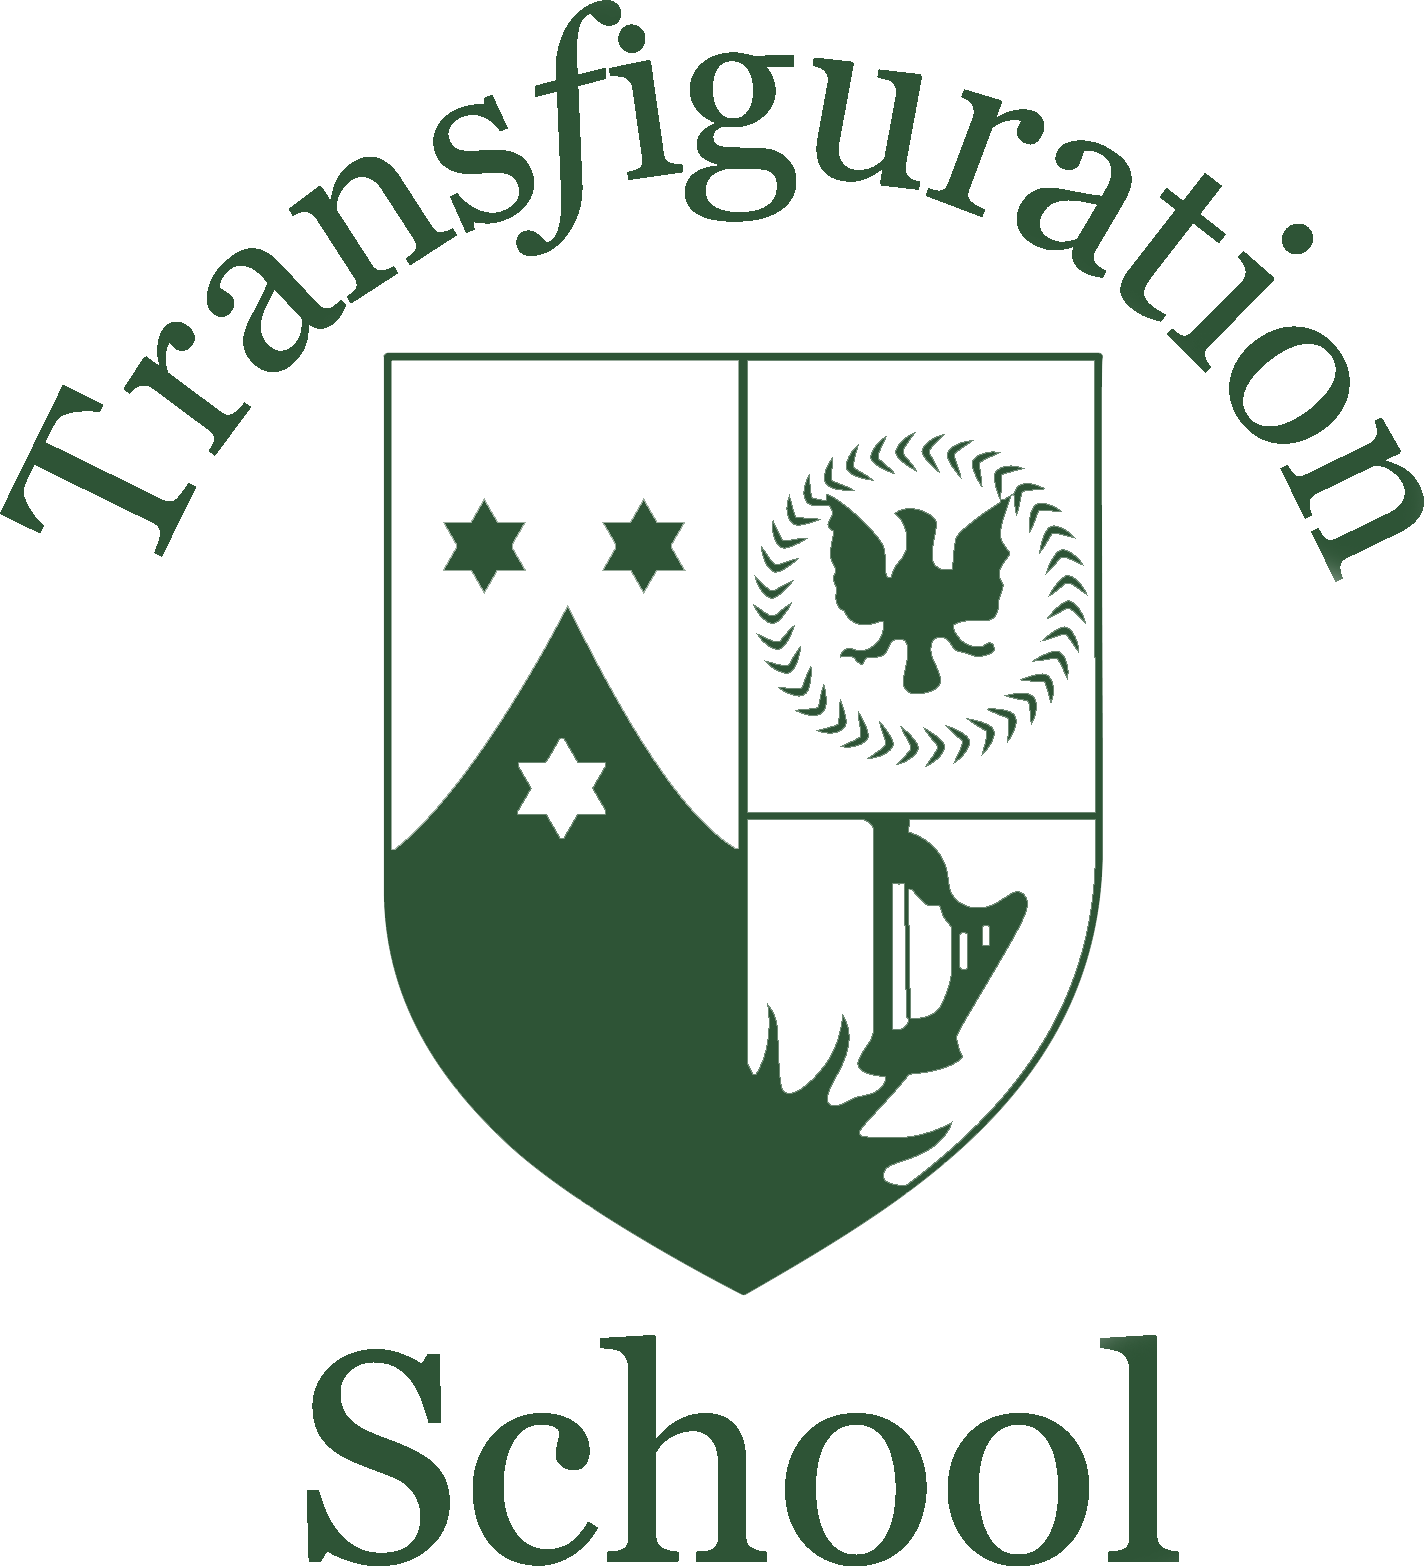 TRANSFIGURATION FACULTY STORE